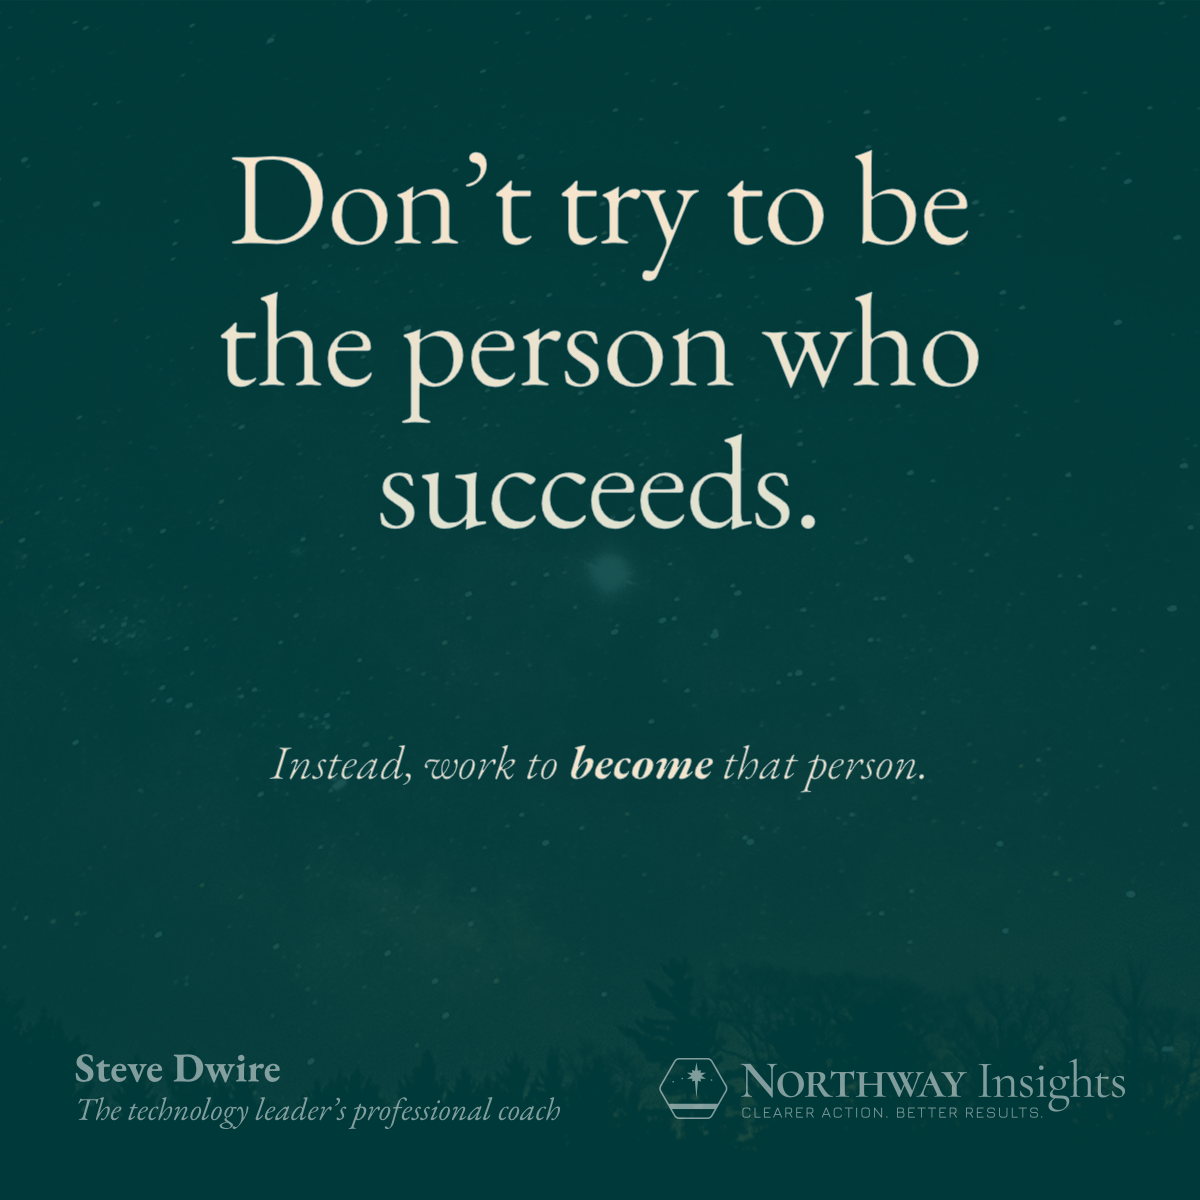 Don't try to be the person who succeeds. (Instead, work to become that person.)